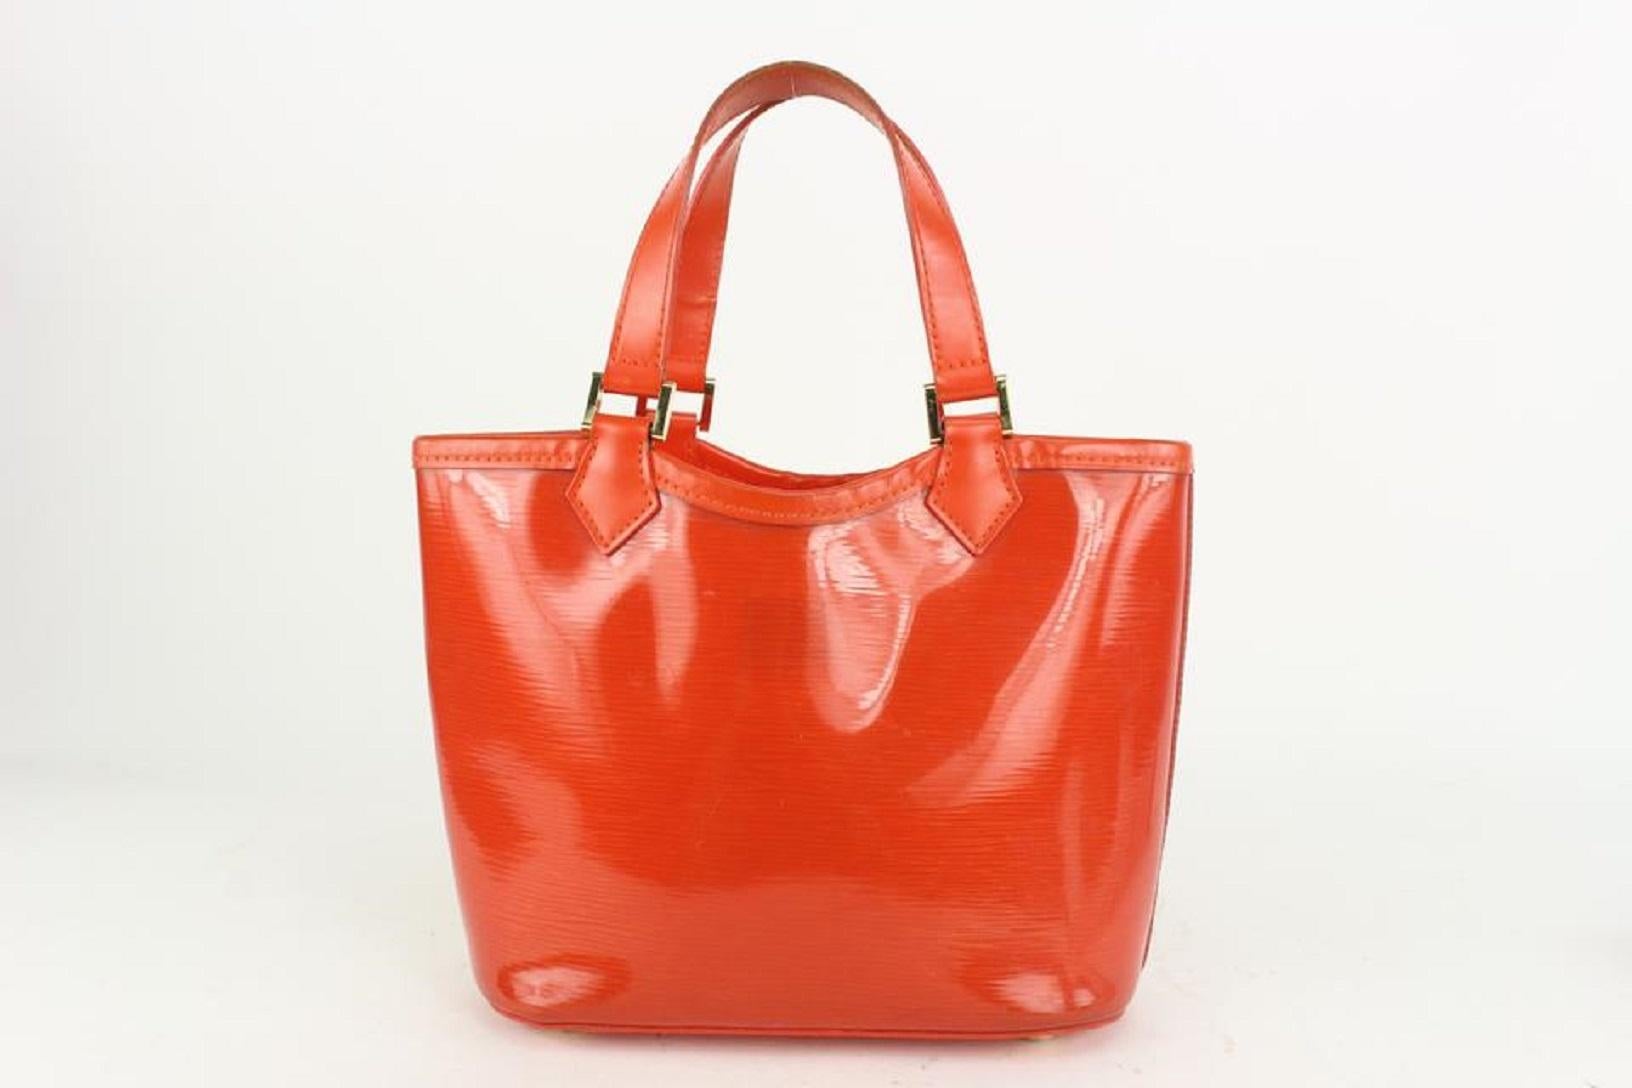 Louis Vuitton Clear Epi Plage Orange Lagoon Bay PM Tote bag 923lv8 In Good Condition For Sale In Dix hills, NY